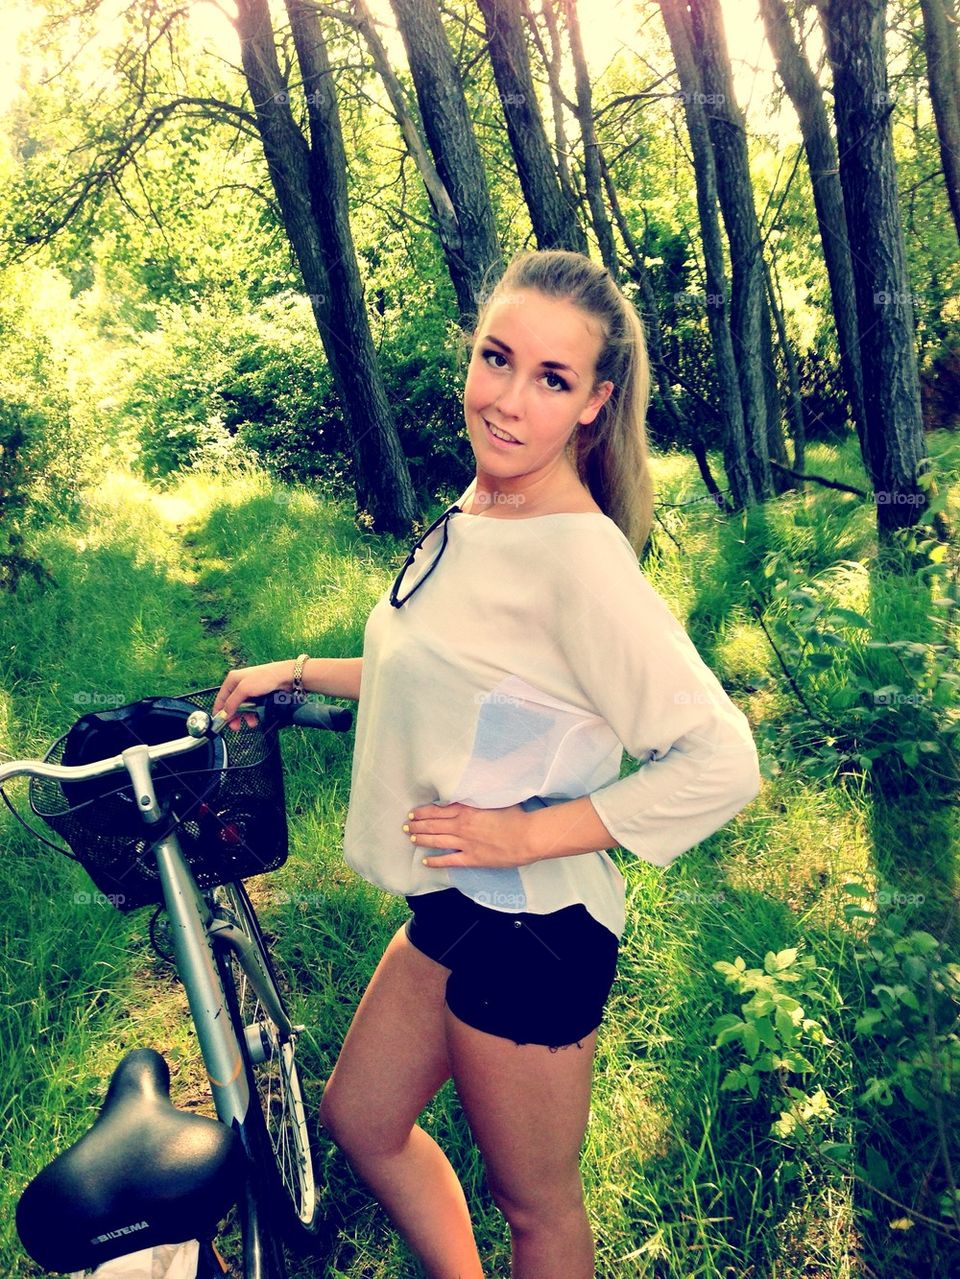 Bicycling in the forest